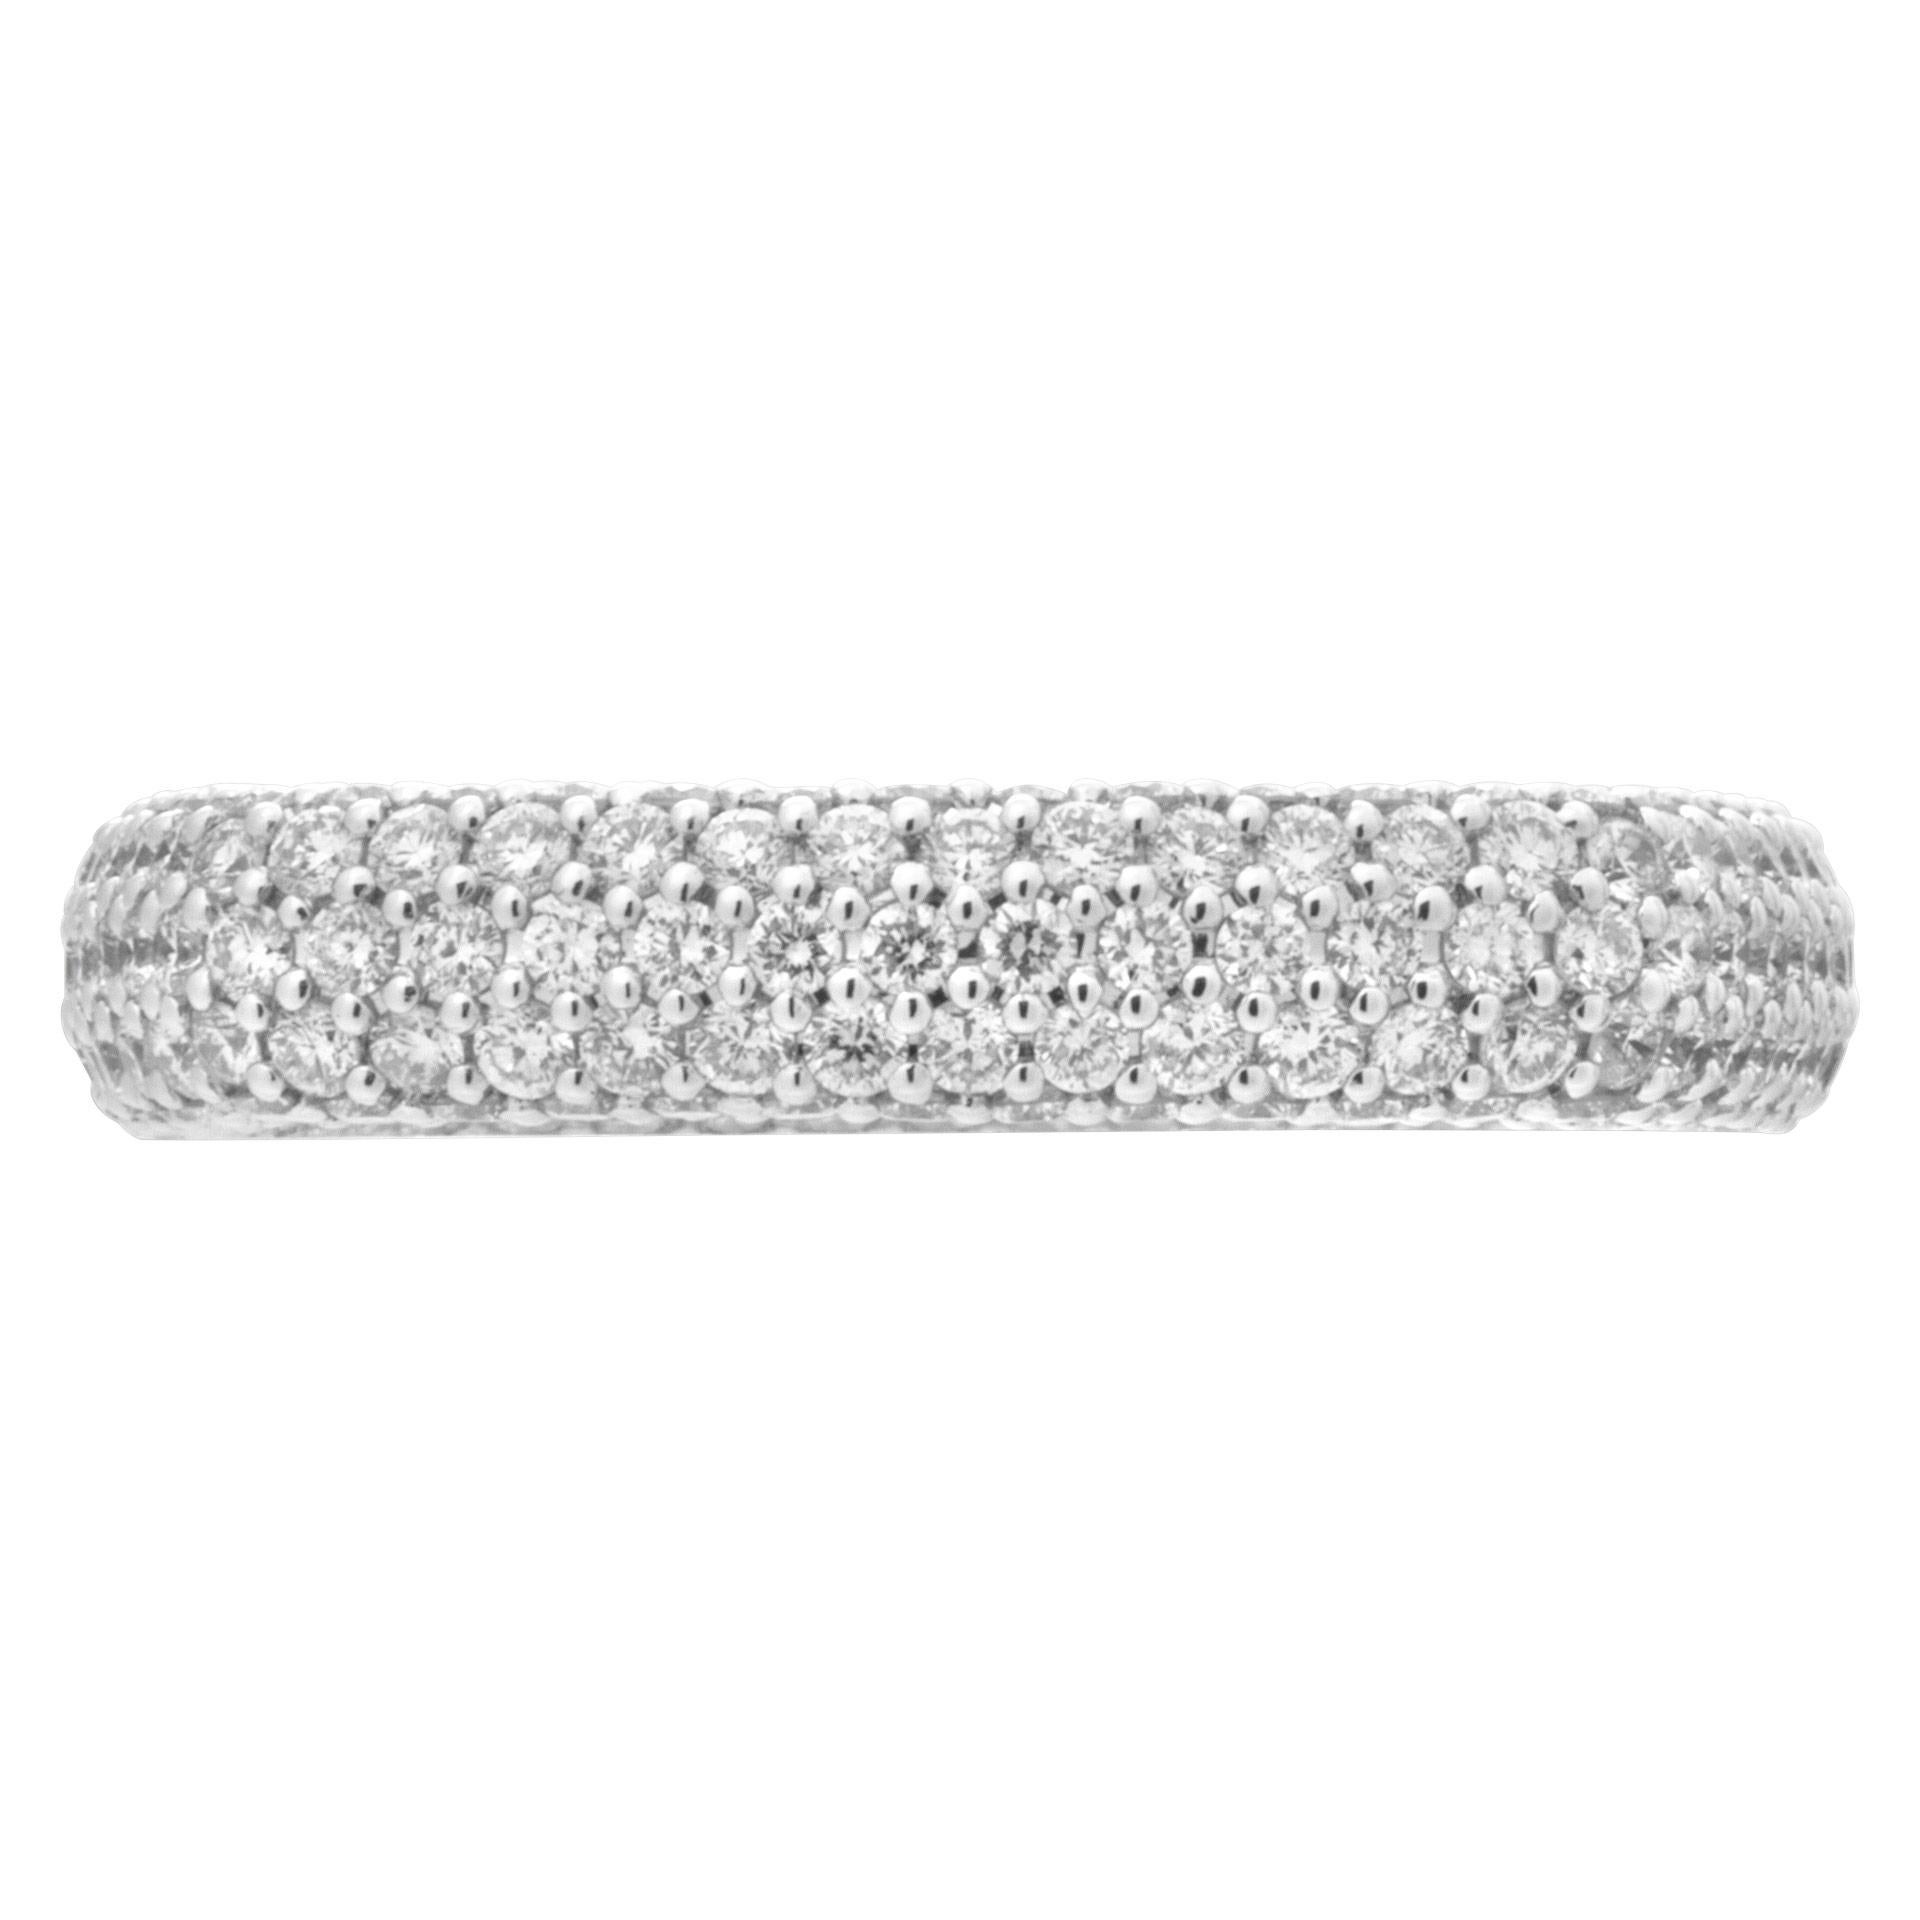 Diamond eternity band pave square in 18k white gold with approximately 3.26 carats in diamonds (H-I color, VS clarity). Ring size 7.5. Band width: 4.5mm.
